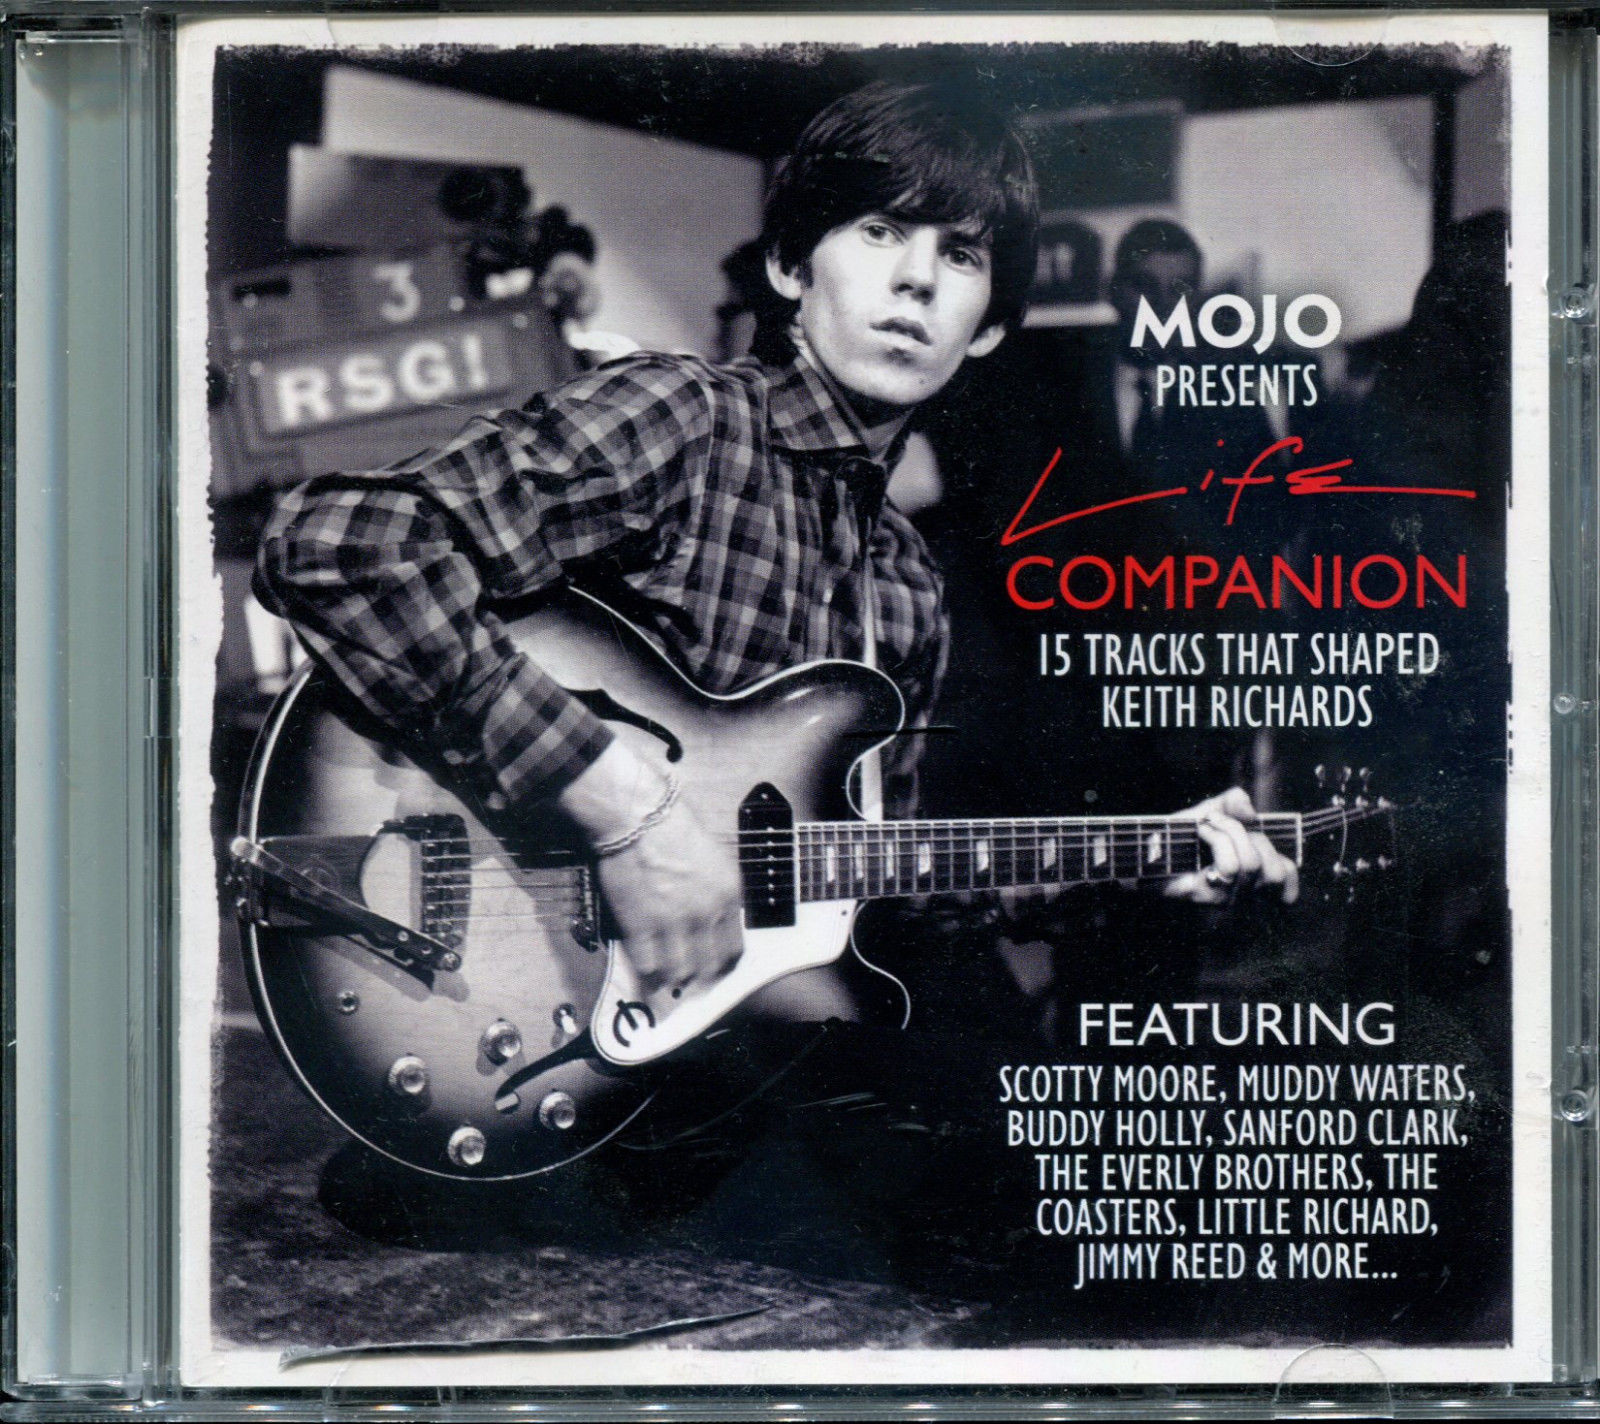 V/A incl. Muddy Waters, Chuck Berry, Little Richard, Bo Diddley, etc - Life Companion, 15 tracks that shaped Keith Richards - Mojo  UK CD